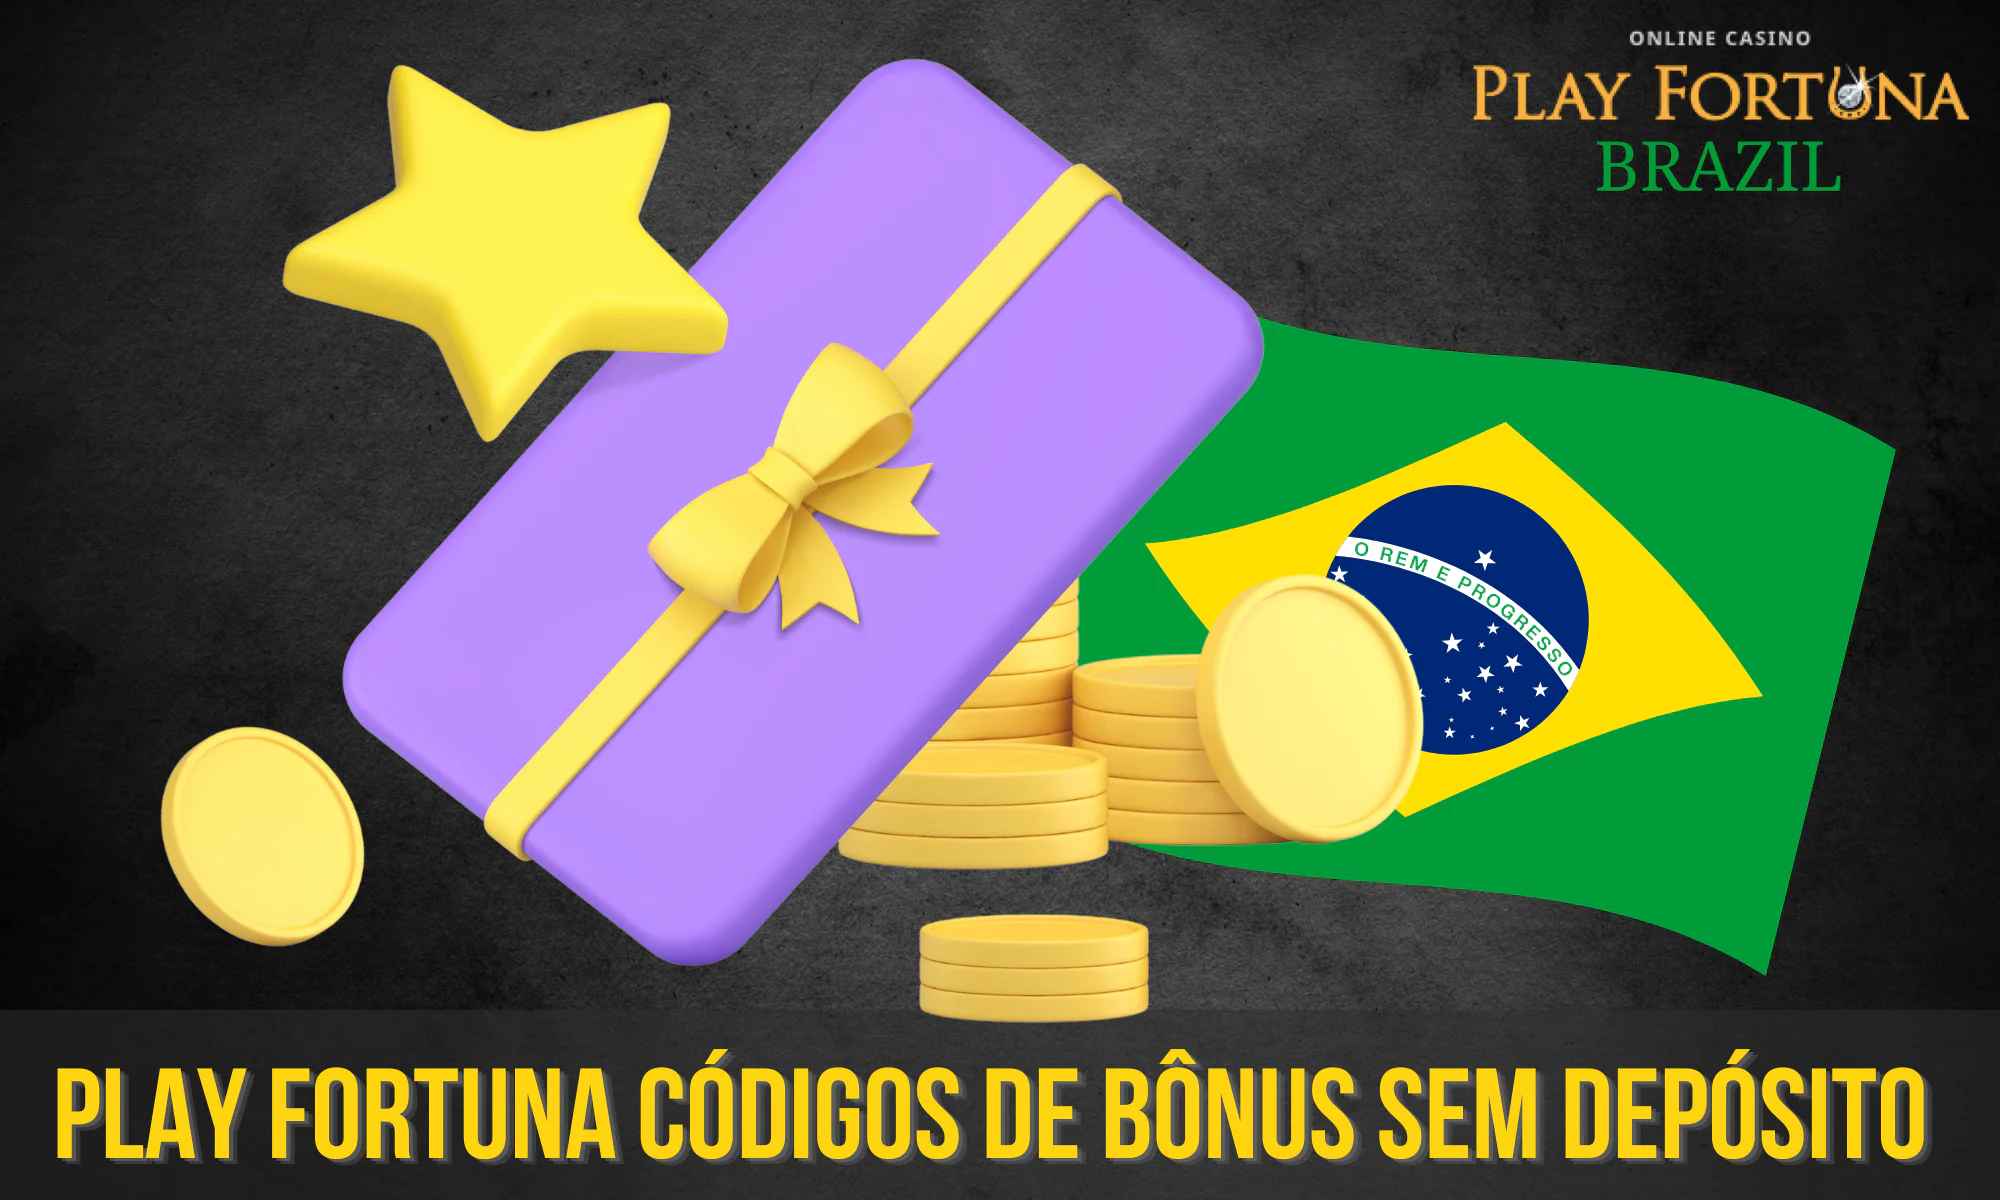 For Brazilian players, Play Fortuna offers no deposit bonuses